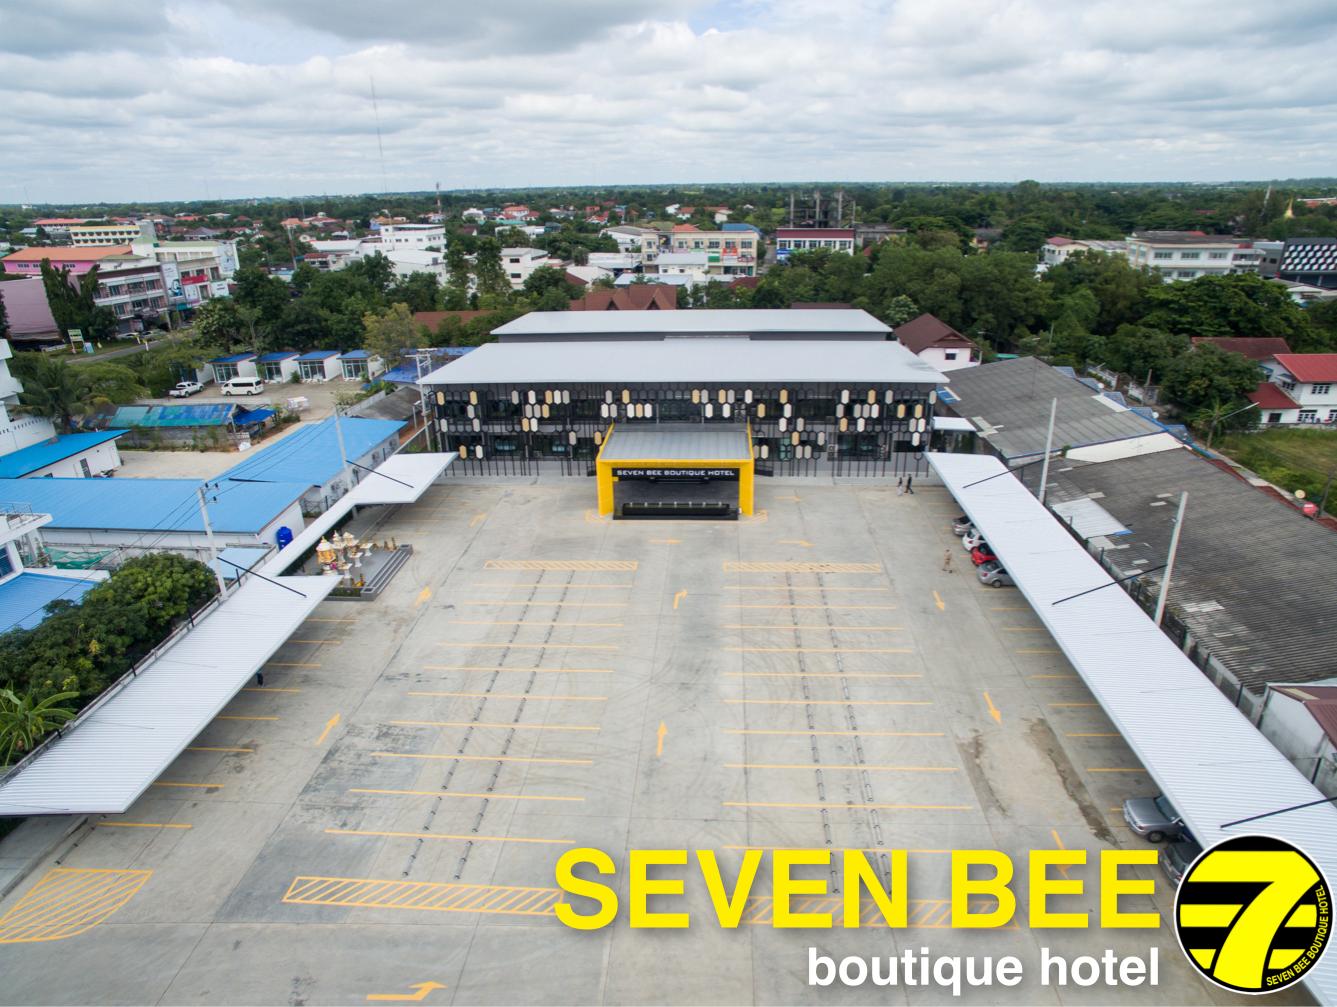 Seven bee boutique hotel - Image 2